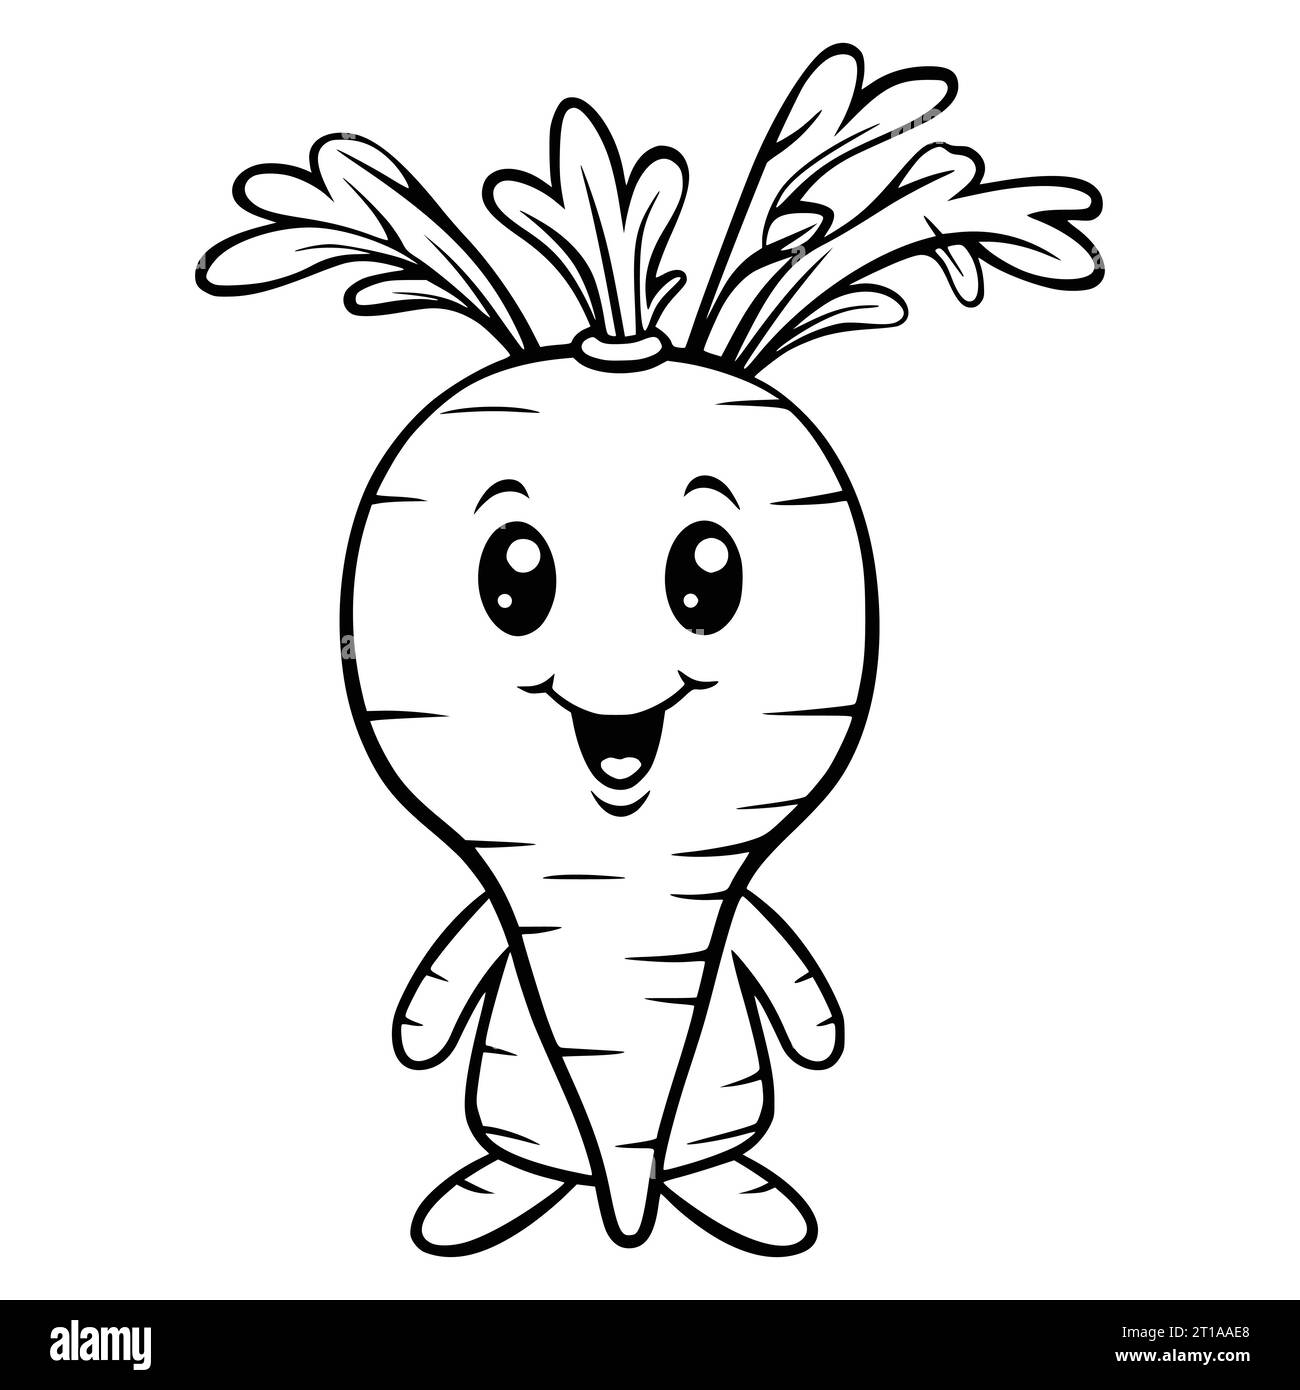 Carrot Coloring Page Drawing For Kids Stock Vector